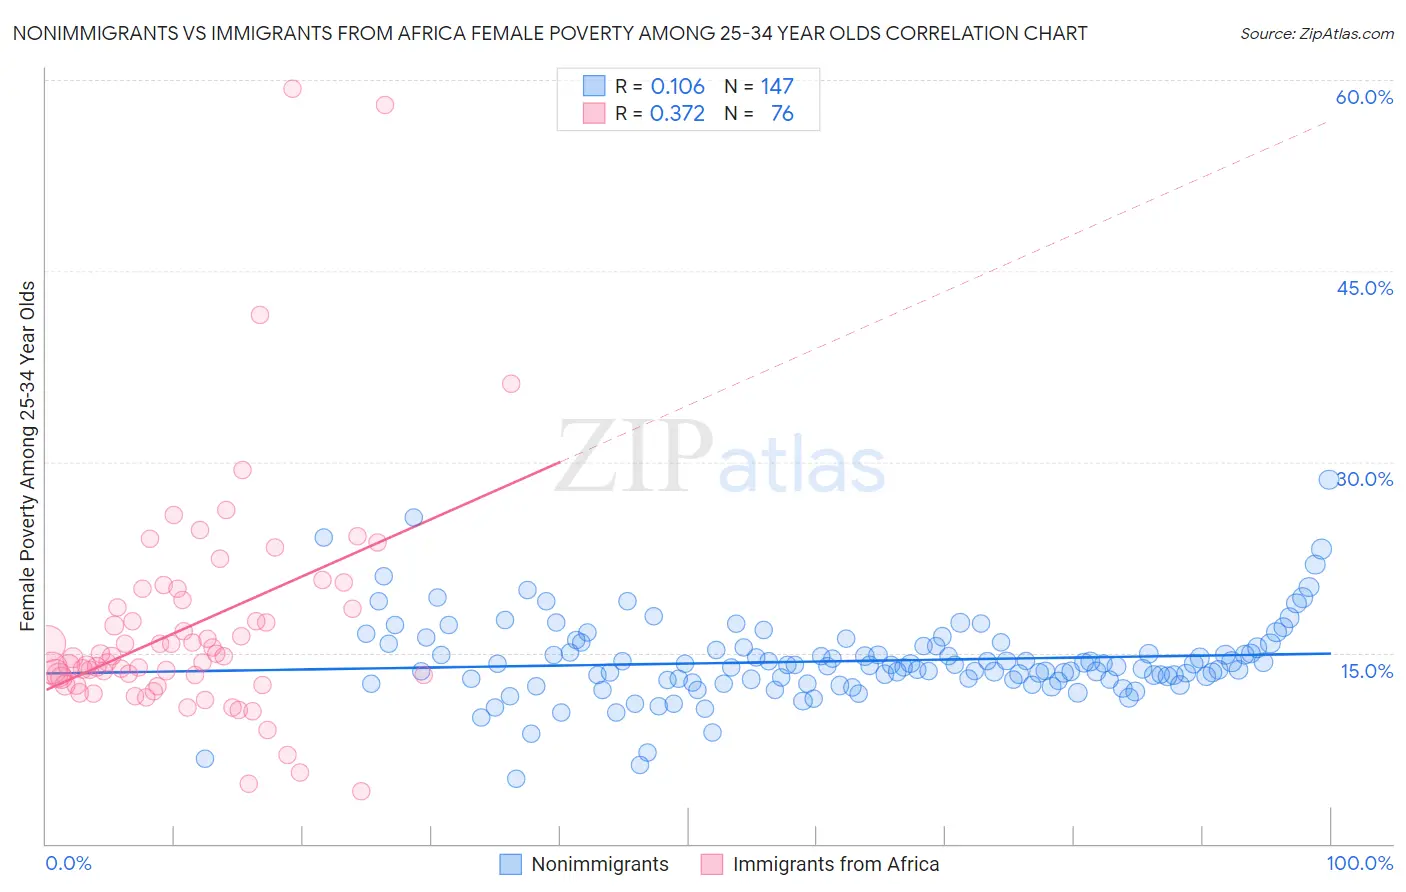 Nonimmigrants vs Immigrants from Africa Female Poverty Among 25-34 Year Olds